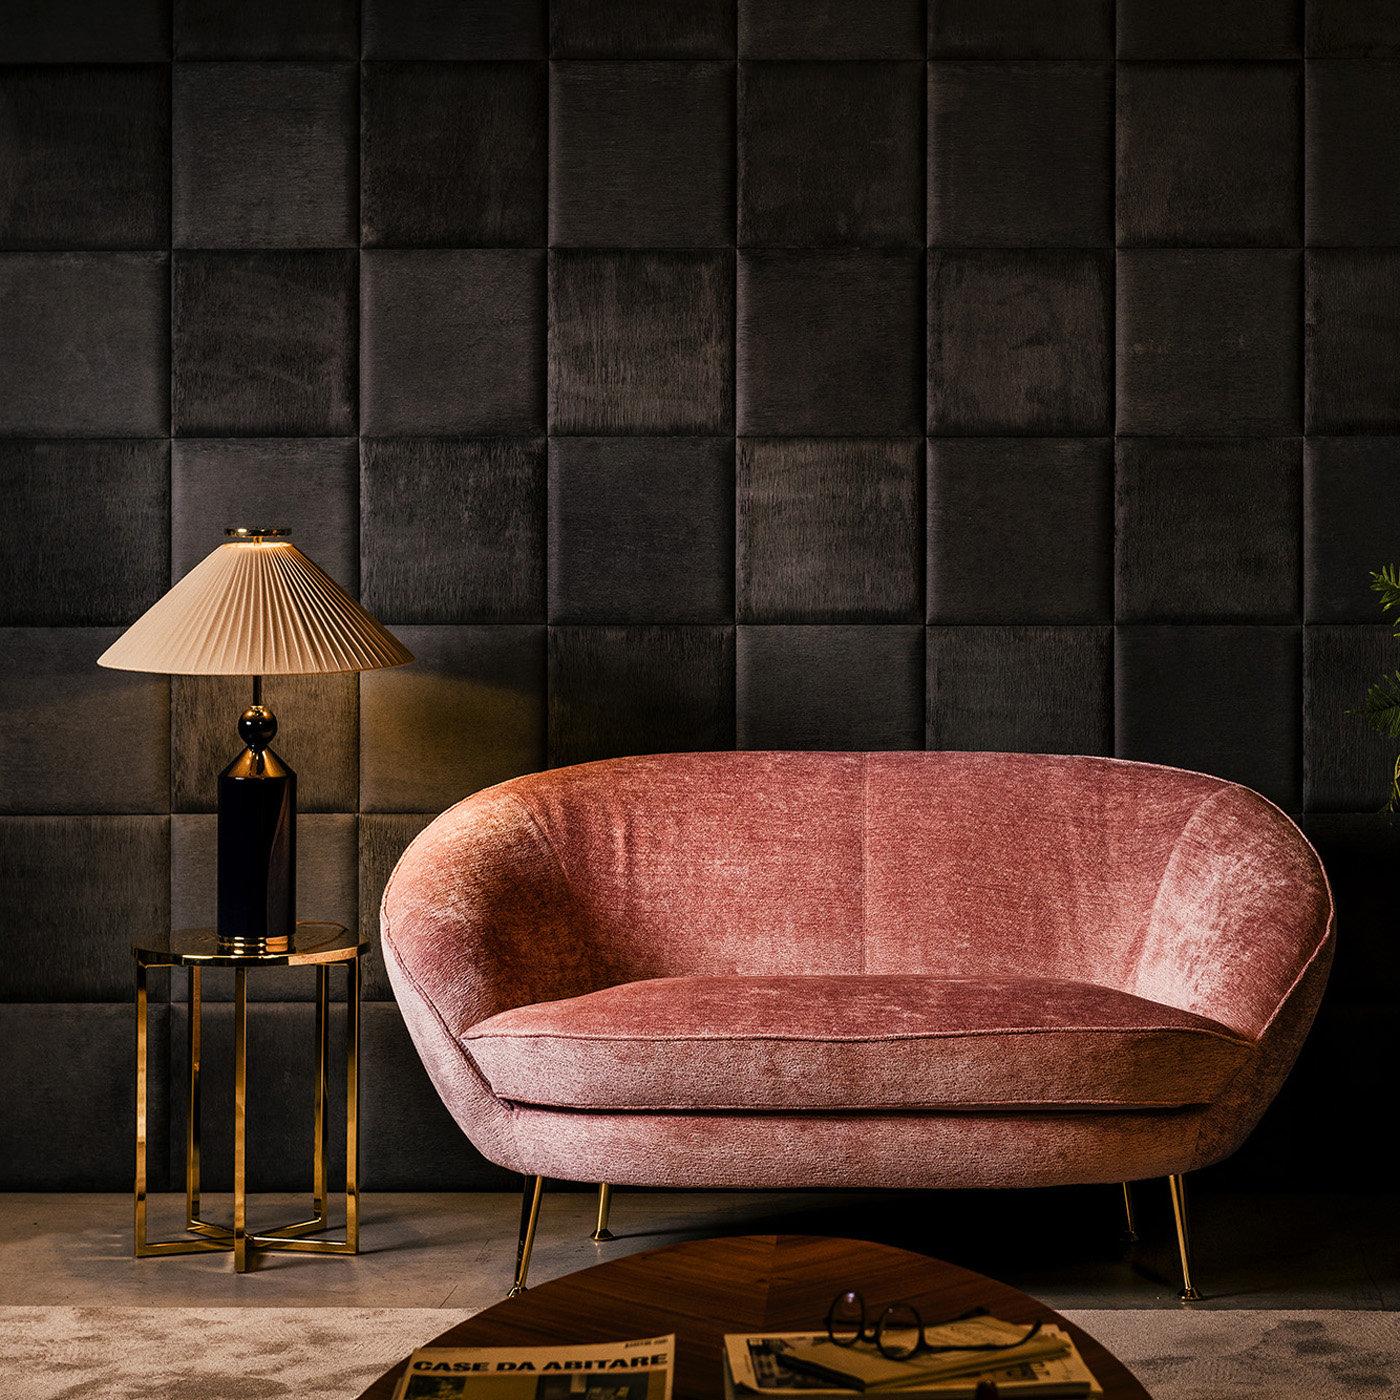 Mid-century appeal and exquisite tailoring characterize this stunning sofa with wrapped forms that will bring a unique and sophisticated look to a modern interior. The beech wood structure has a rounded back and seat cushions covered in blush pink